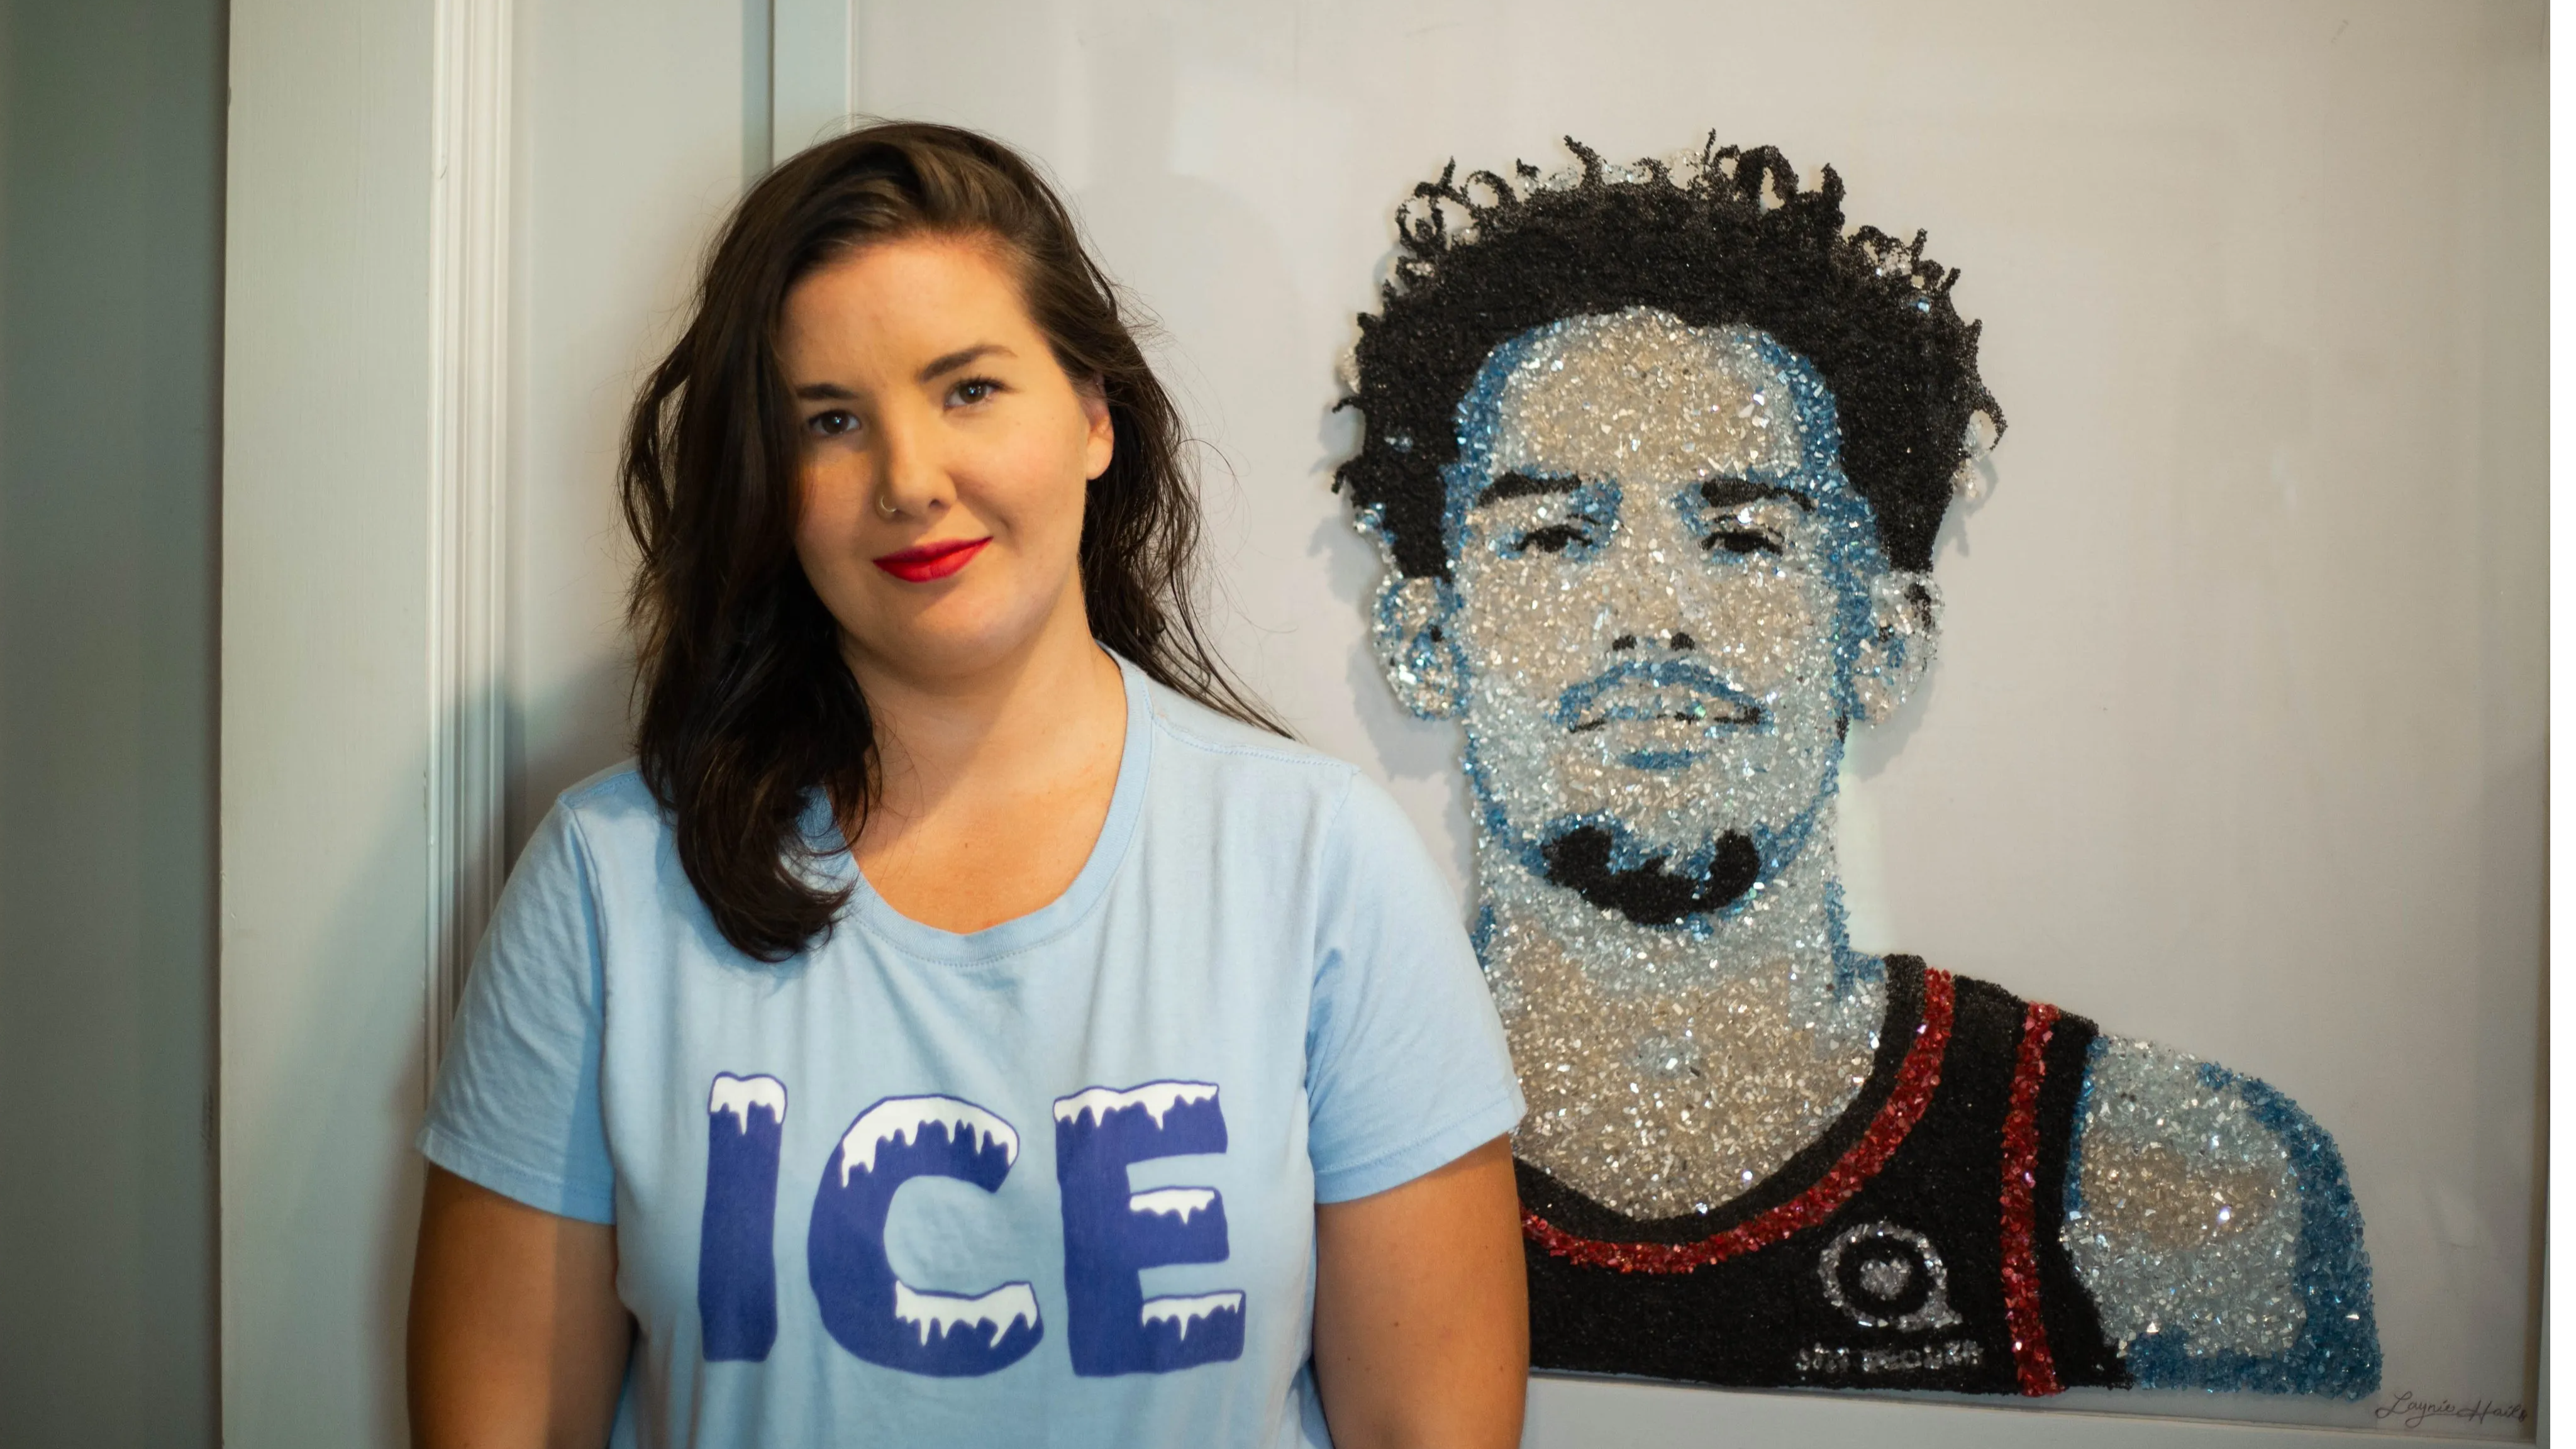 Meet artist Laynie Hail, who is inspired by Atalanta Hawks’ star Trae Young